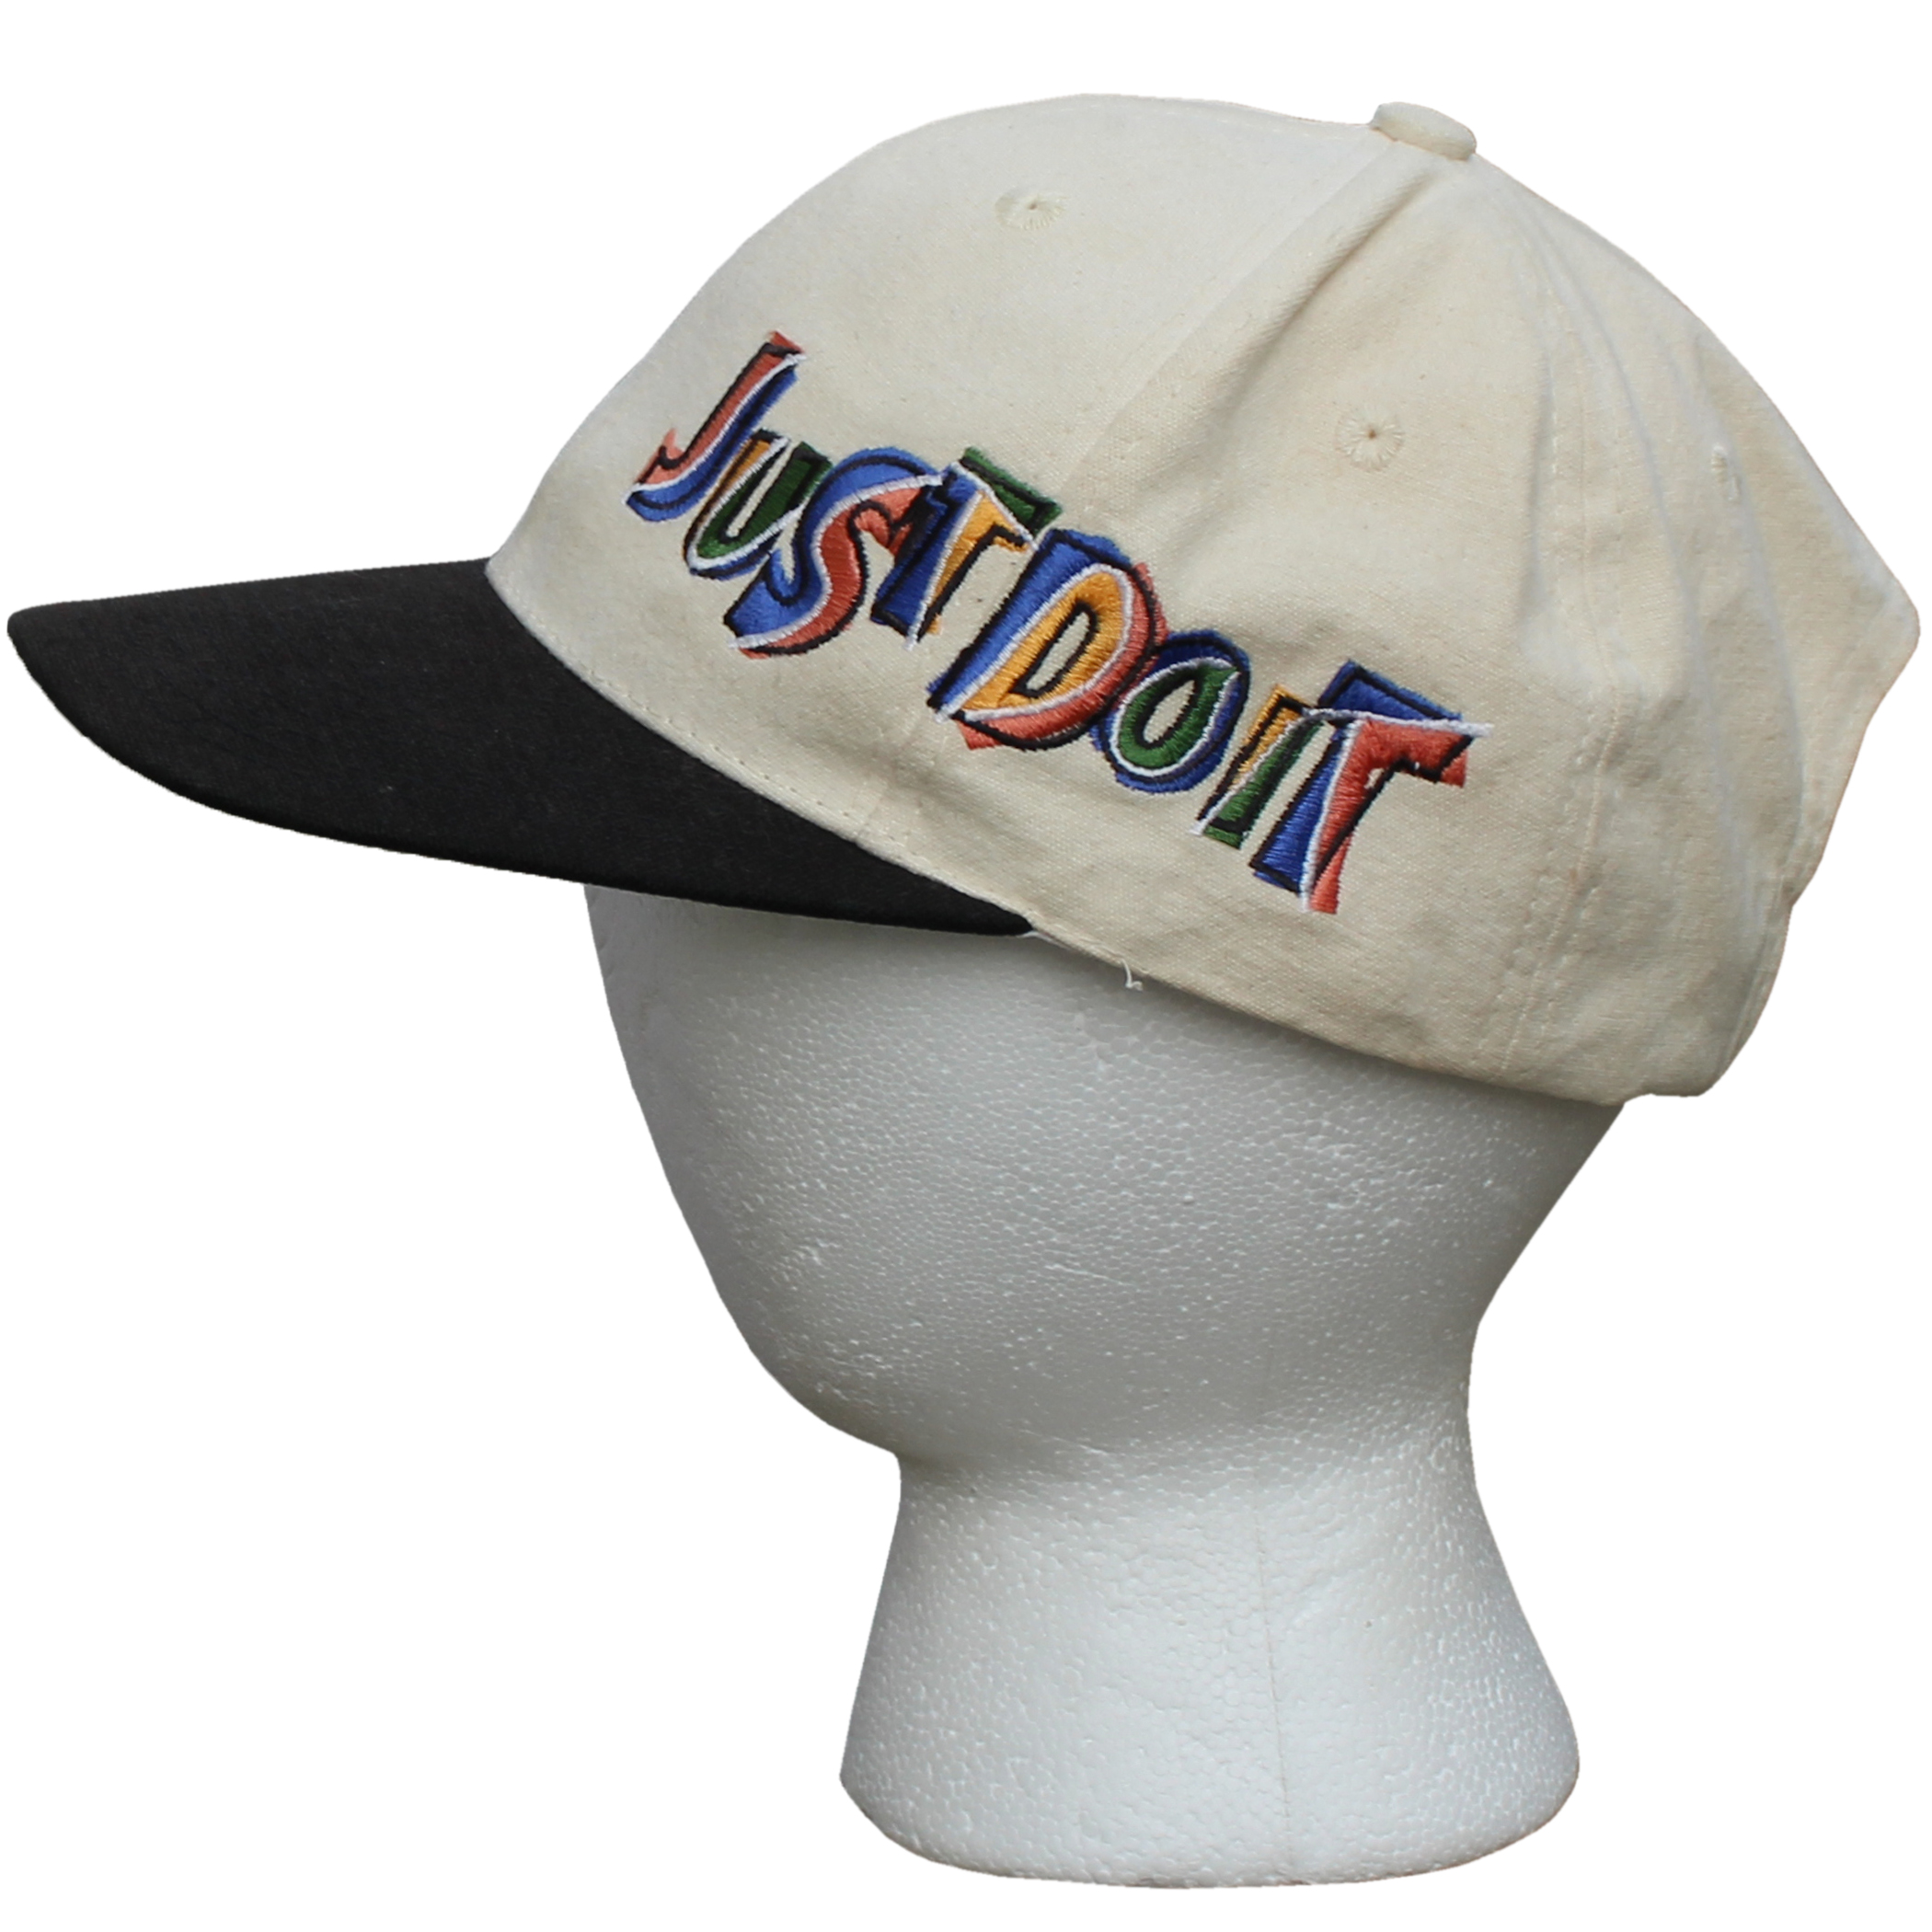 nike just do it hat